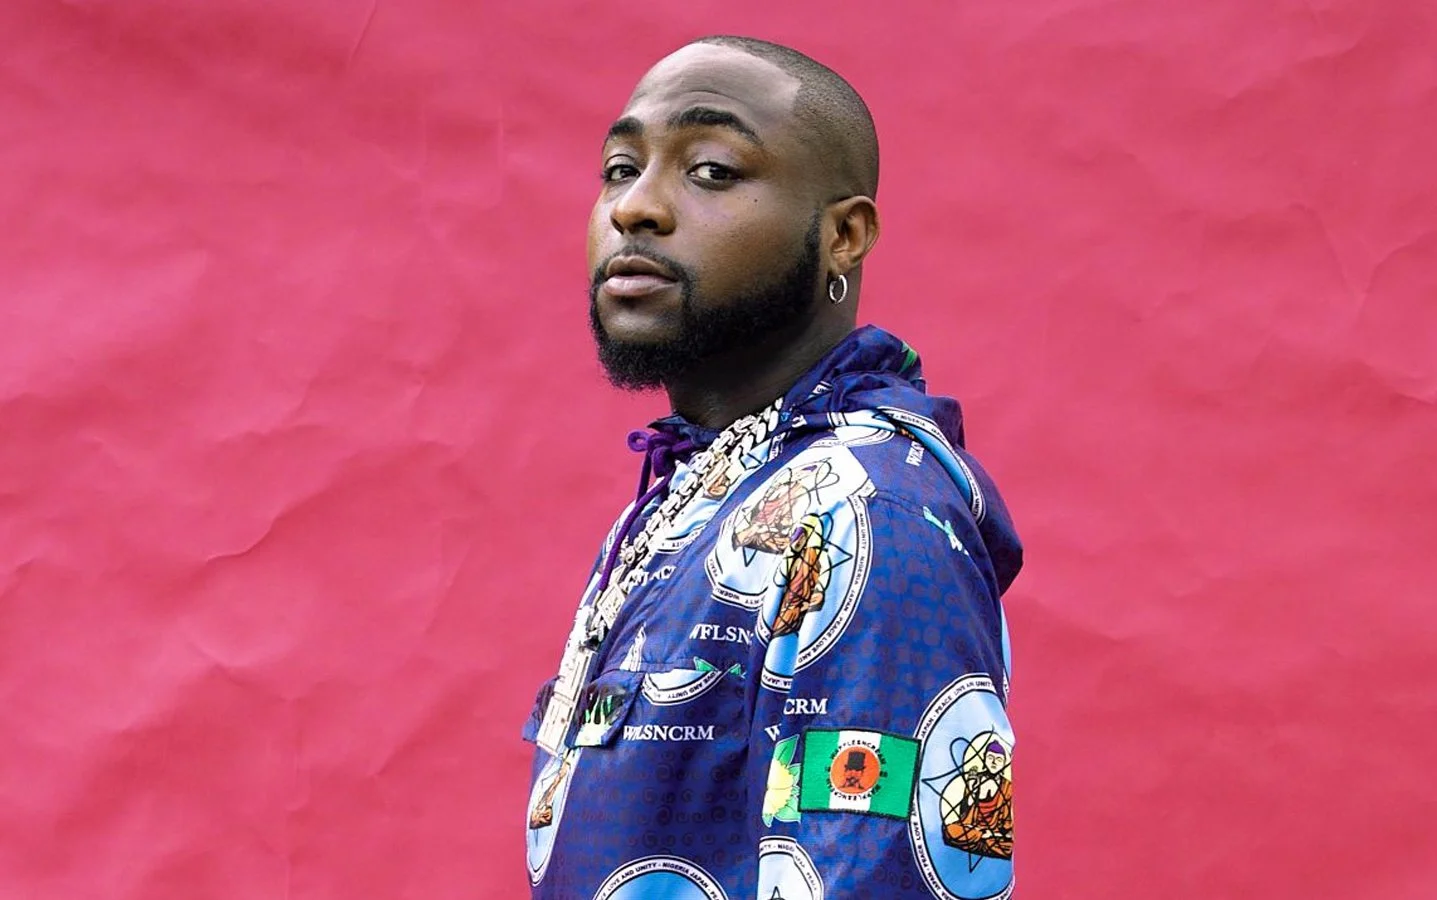 'Before I Turn Sour' Davido Hints On Retirement Plans